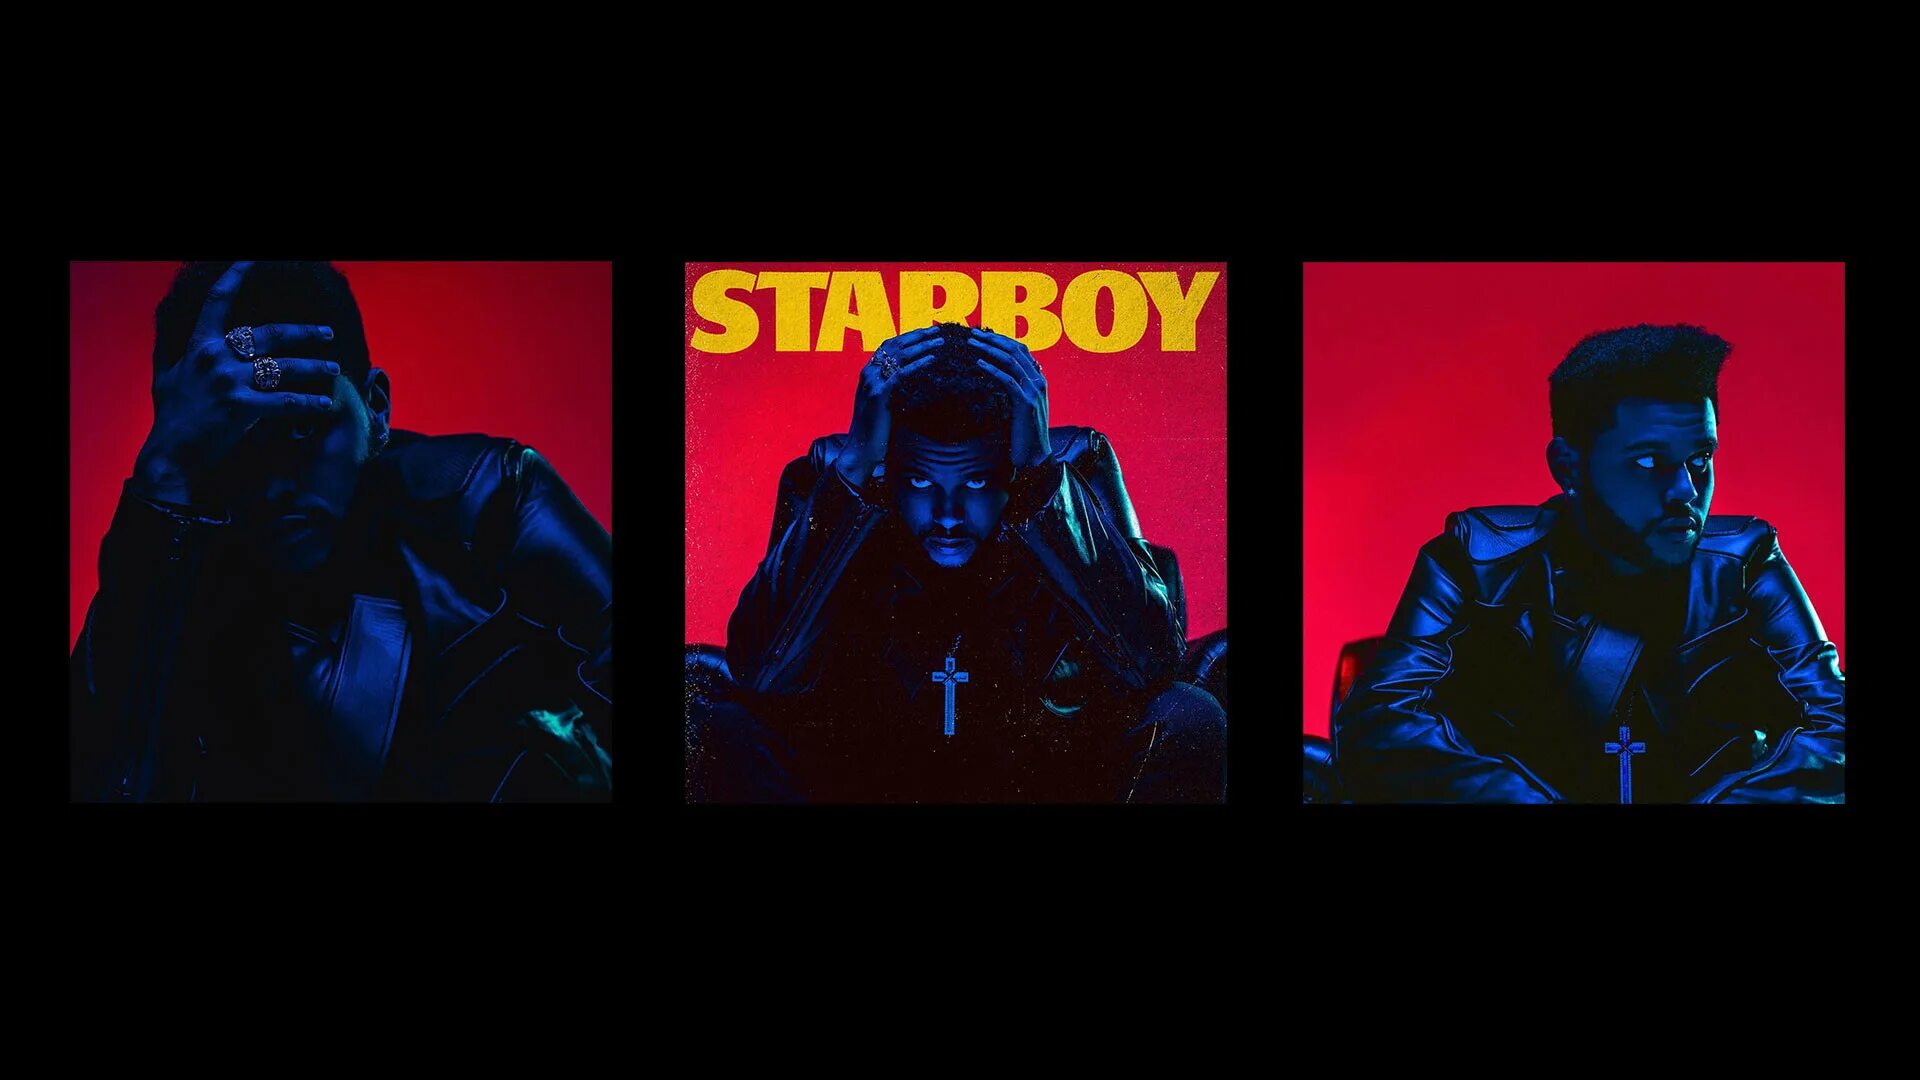 The Weeknd 2022. The Weeknd Starboy album Cover. Starboy the Weeknd обложка. The Weeknd Эстетика. Again the weekend